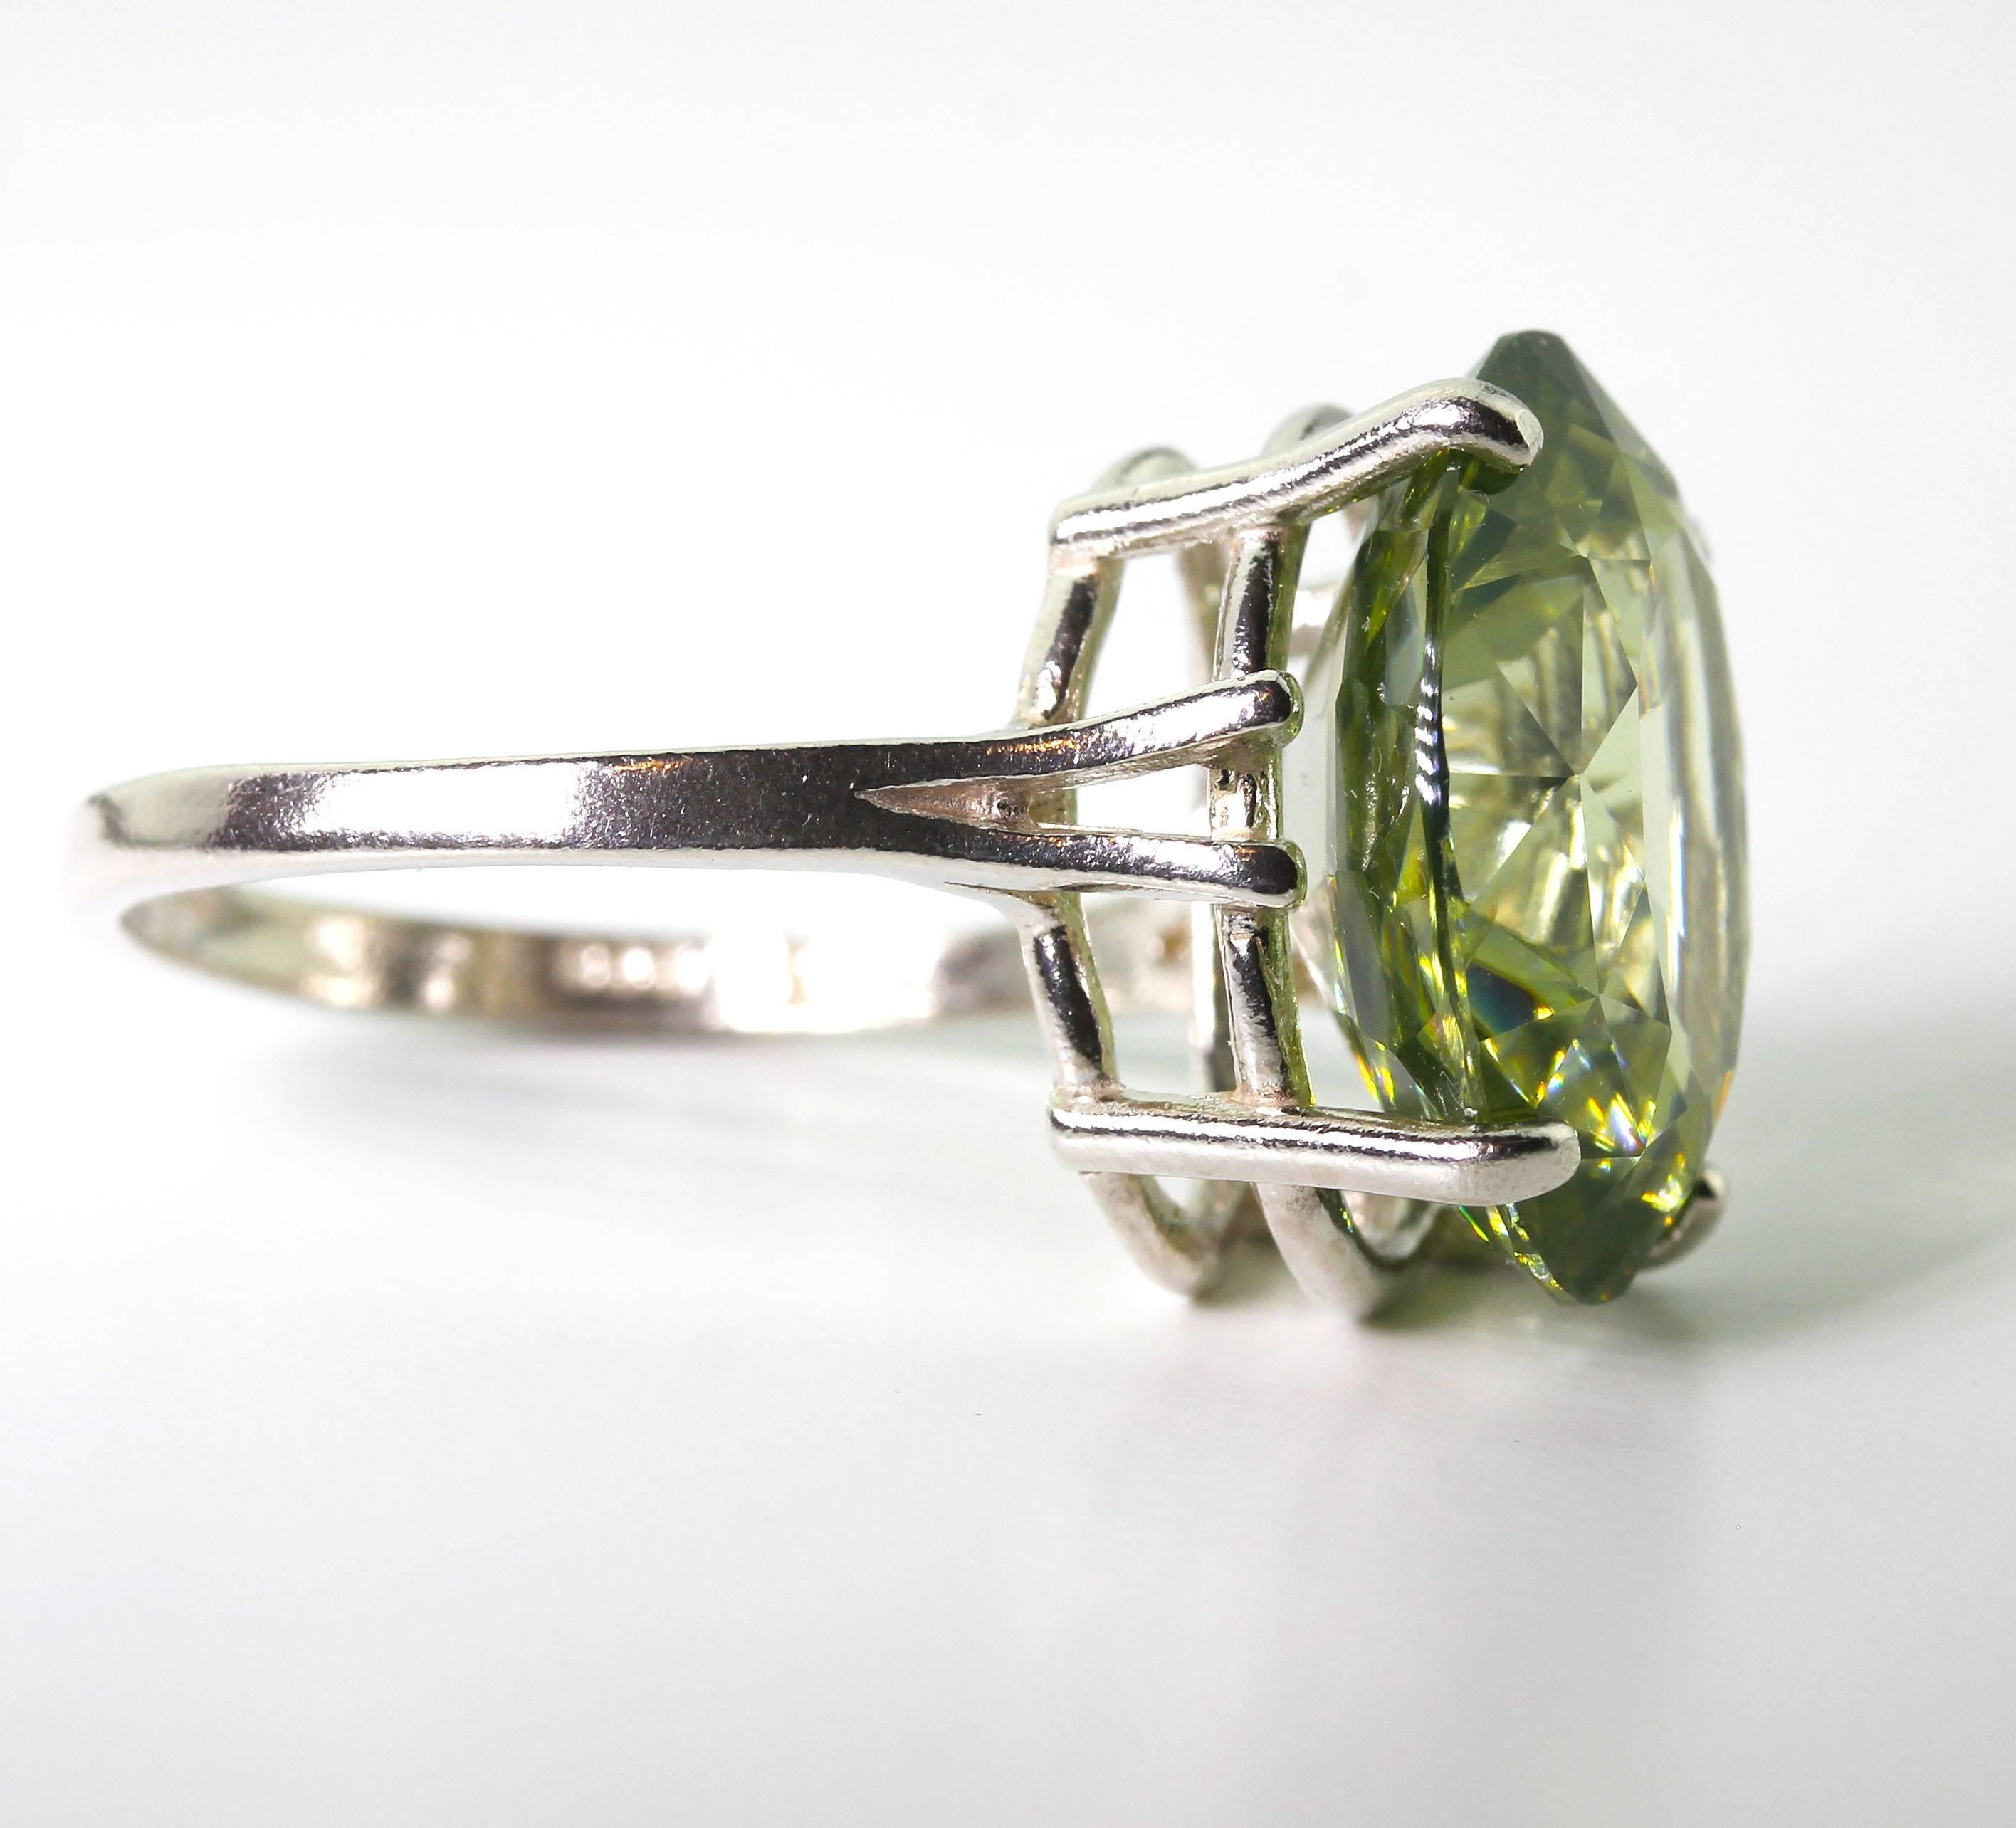 Oval Cut AJD Gorgeous 14.48 Cts Oval Natural Sri Lankan Green Zircon Cocktail Ring For Sale